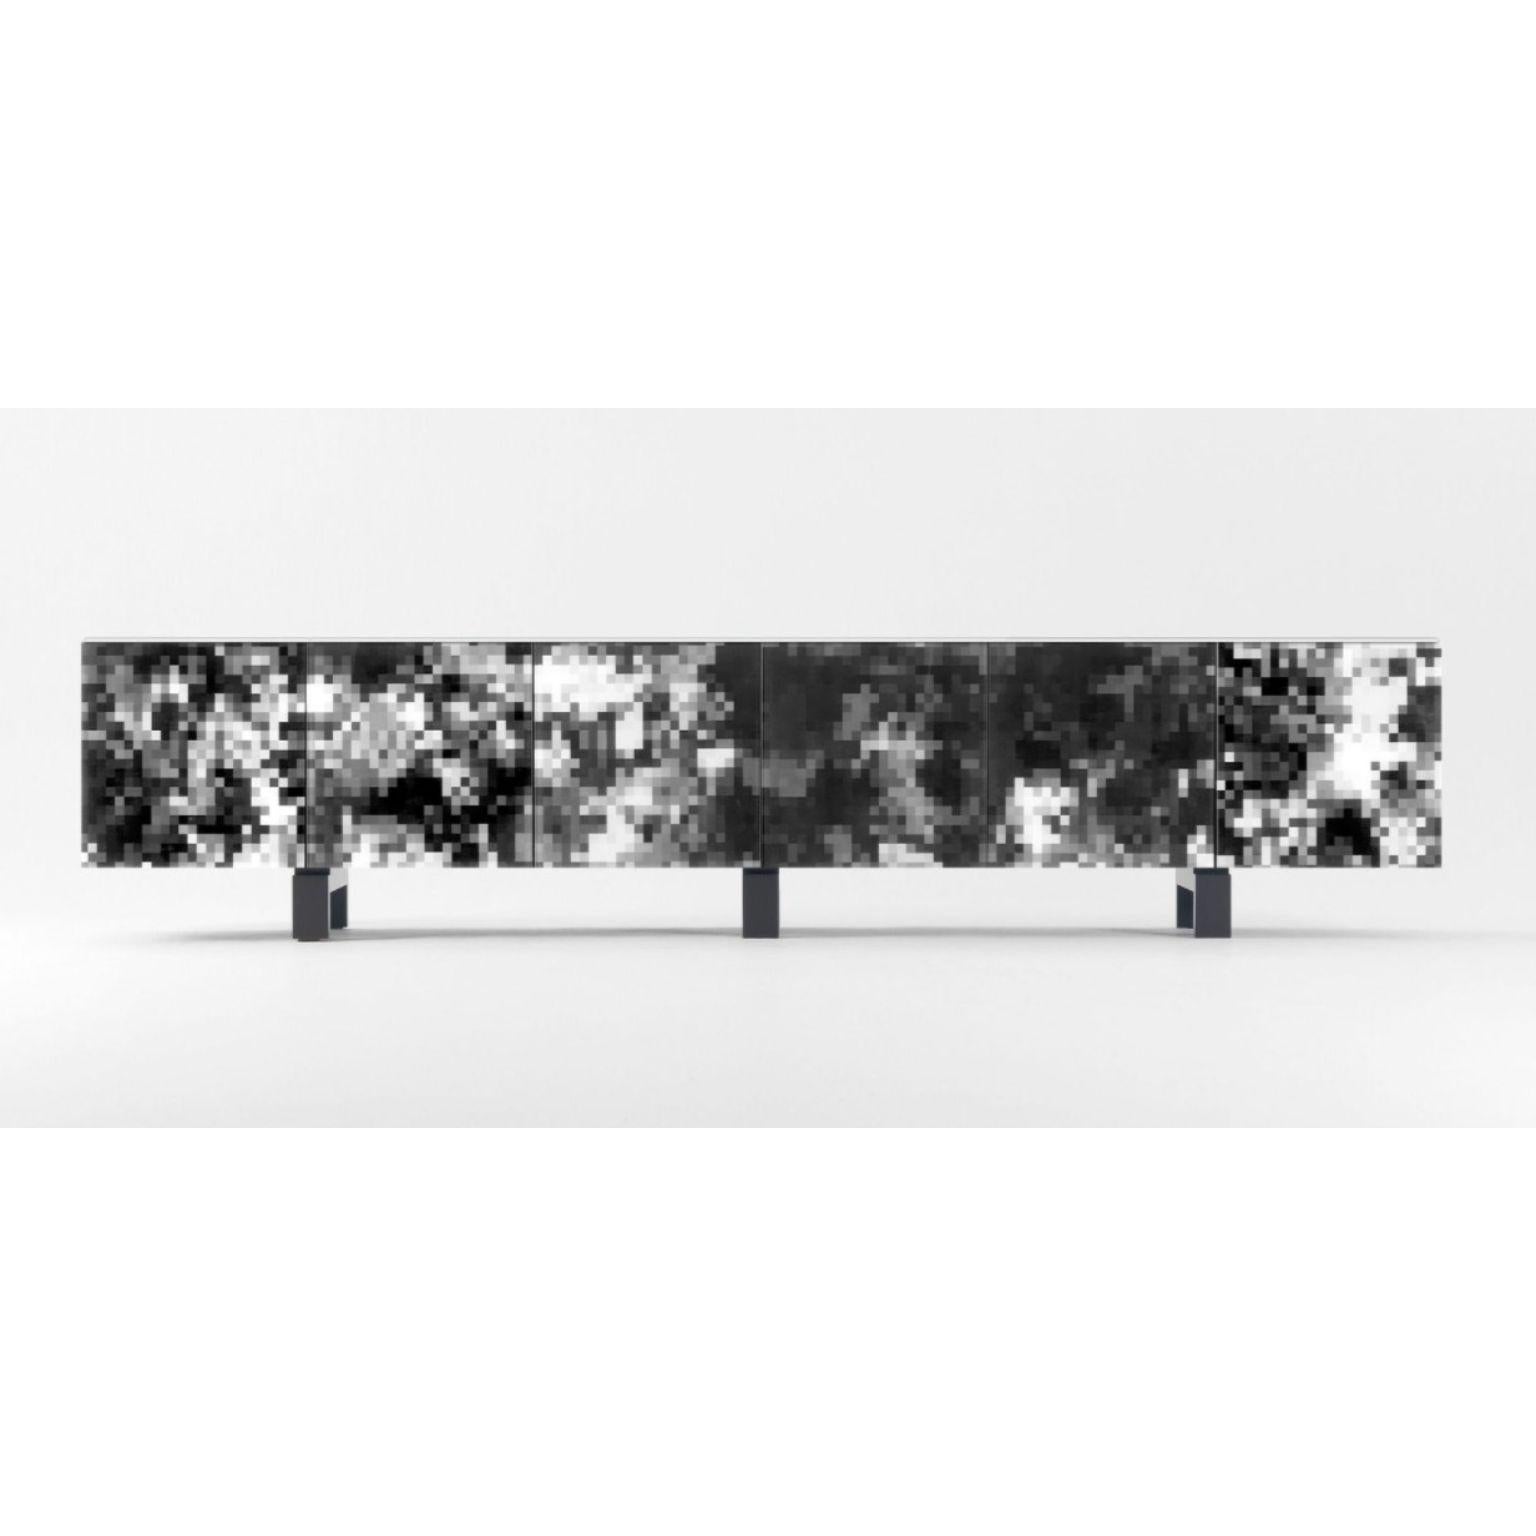 3 Meters dreams black cabinet by Cristian Zuzunaga
Dimensions: D 51 x W 300 x H 67 cm 
Materials: modules, doors, frontal parts, and drawers are lacquered in a matte black finish. Tops, frontals, and sides are mounted with 6mm tempered printed